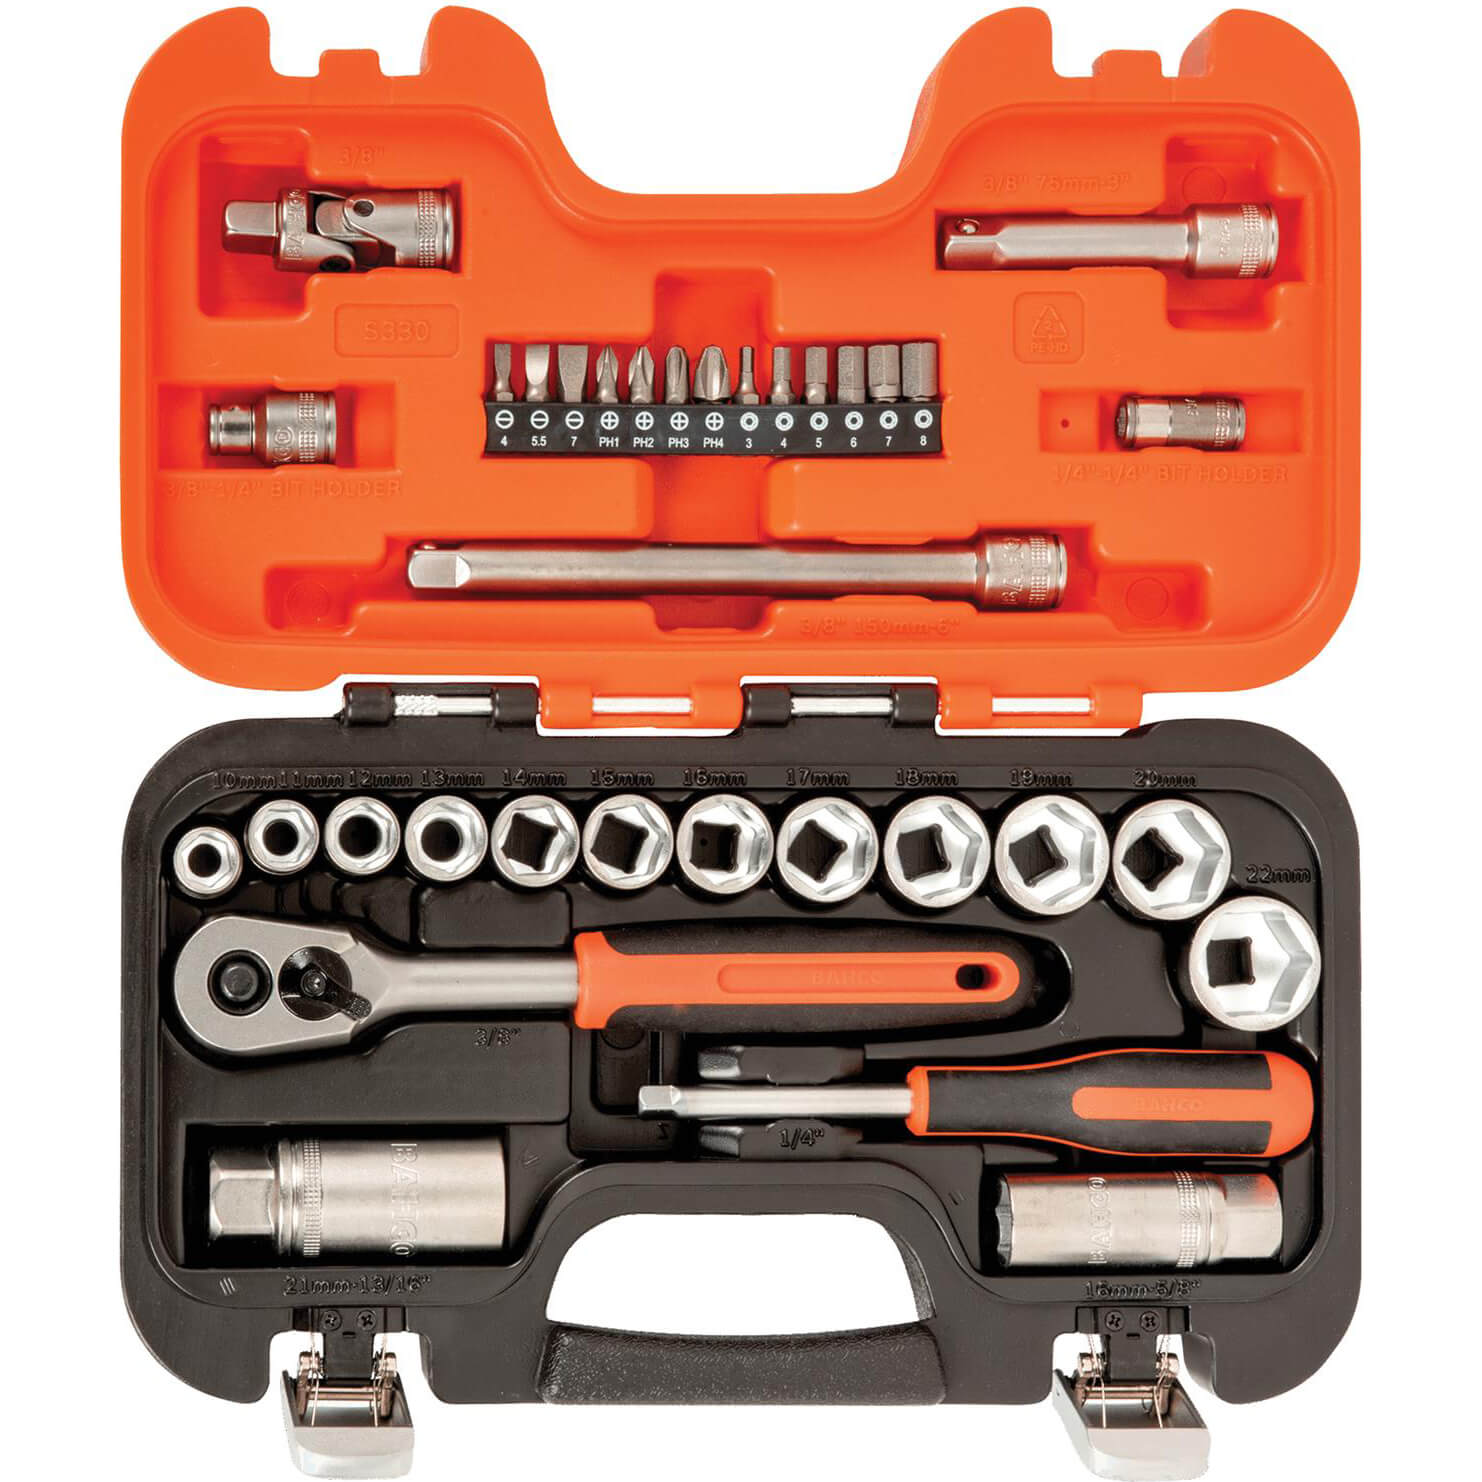 Image of Bahco S330 34 Piece 1/4" and 3/8" Drive Socket Set Combination